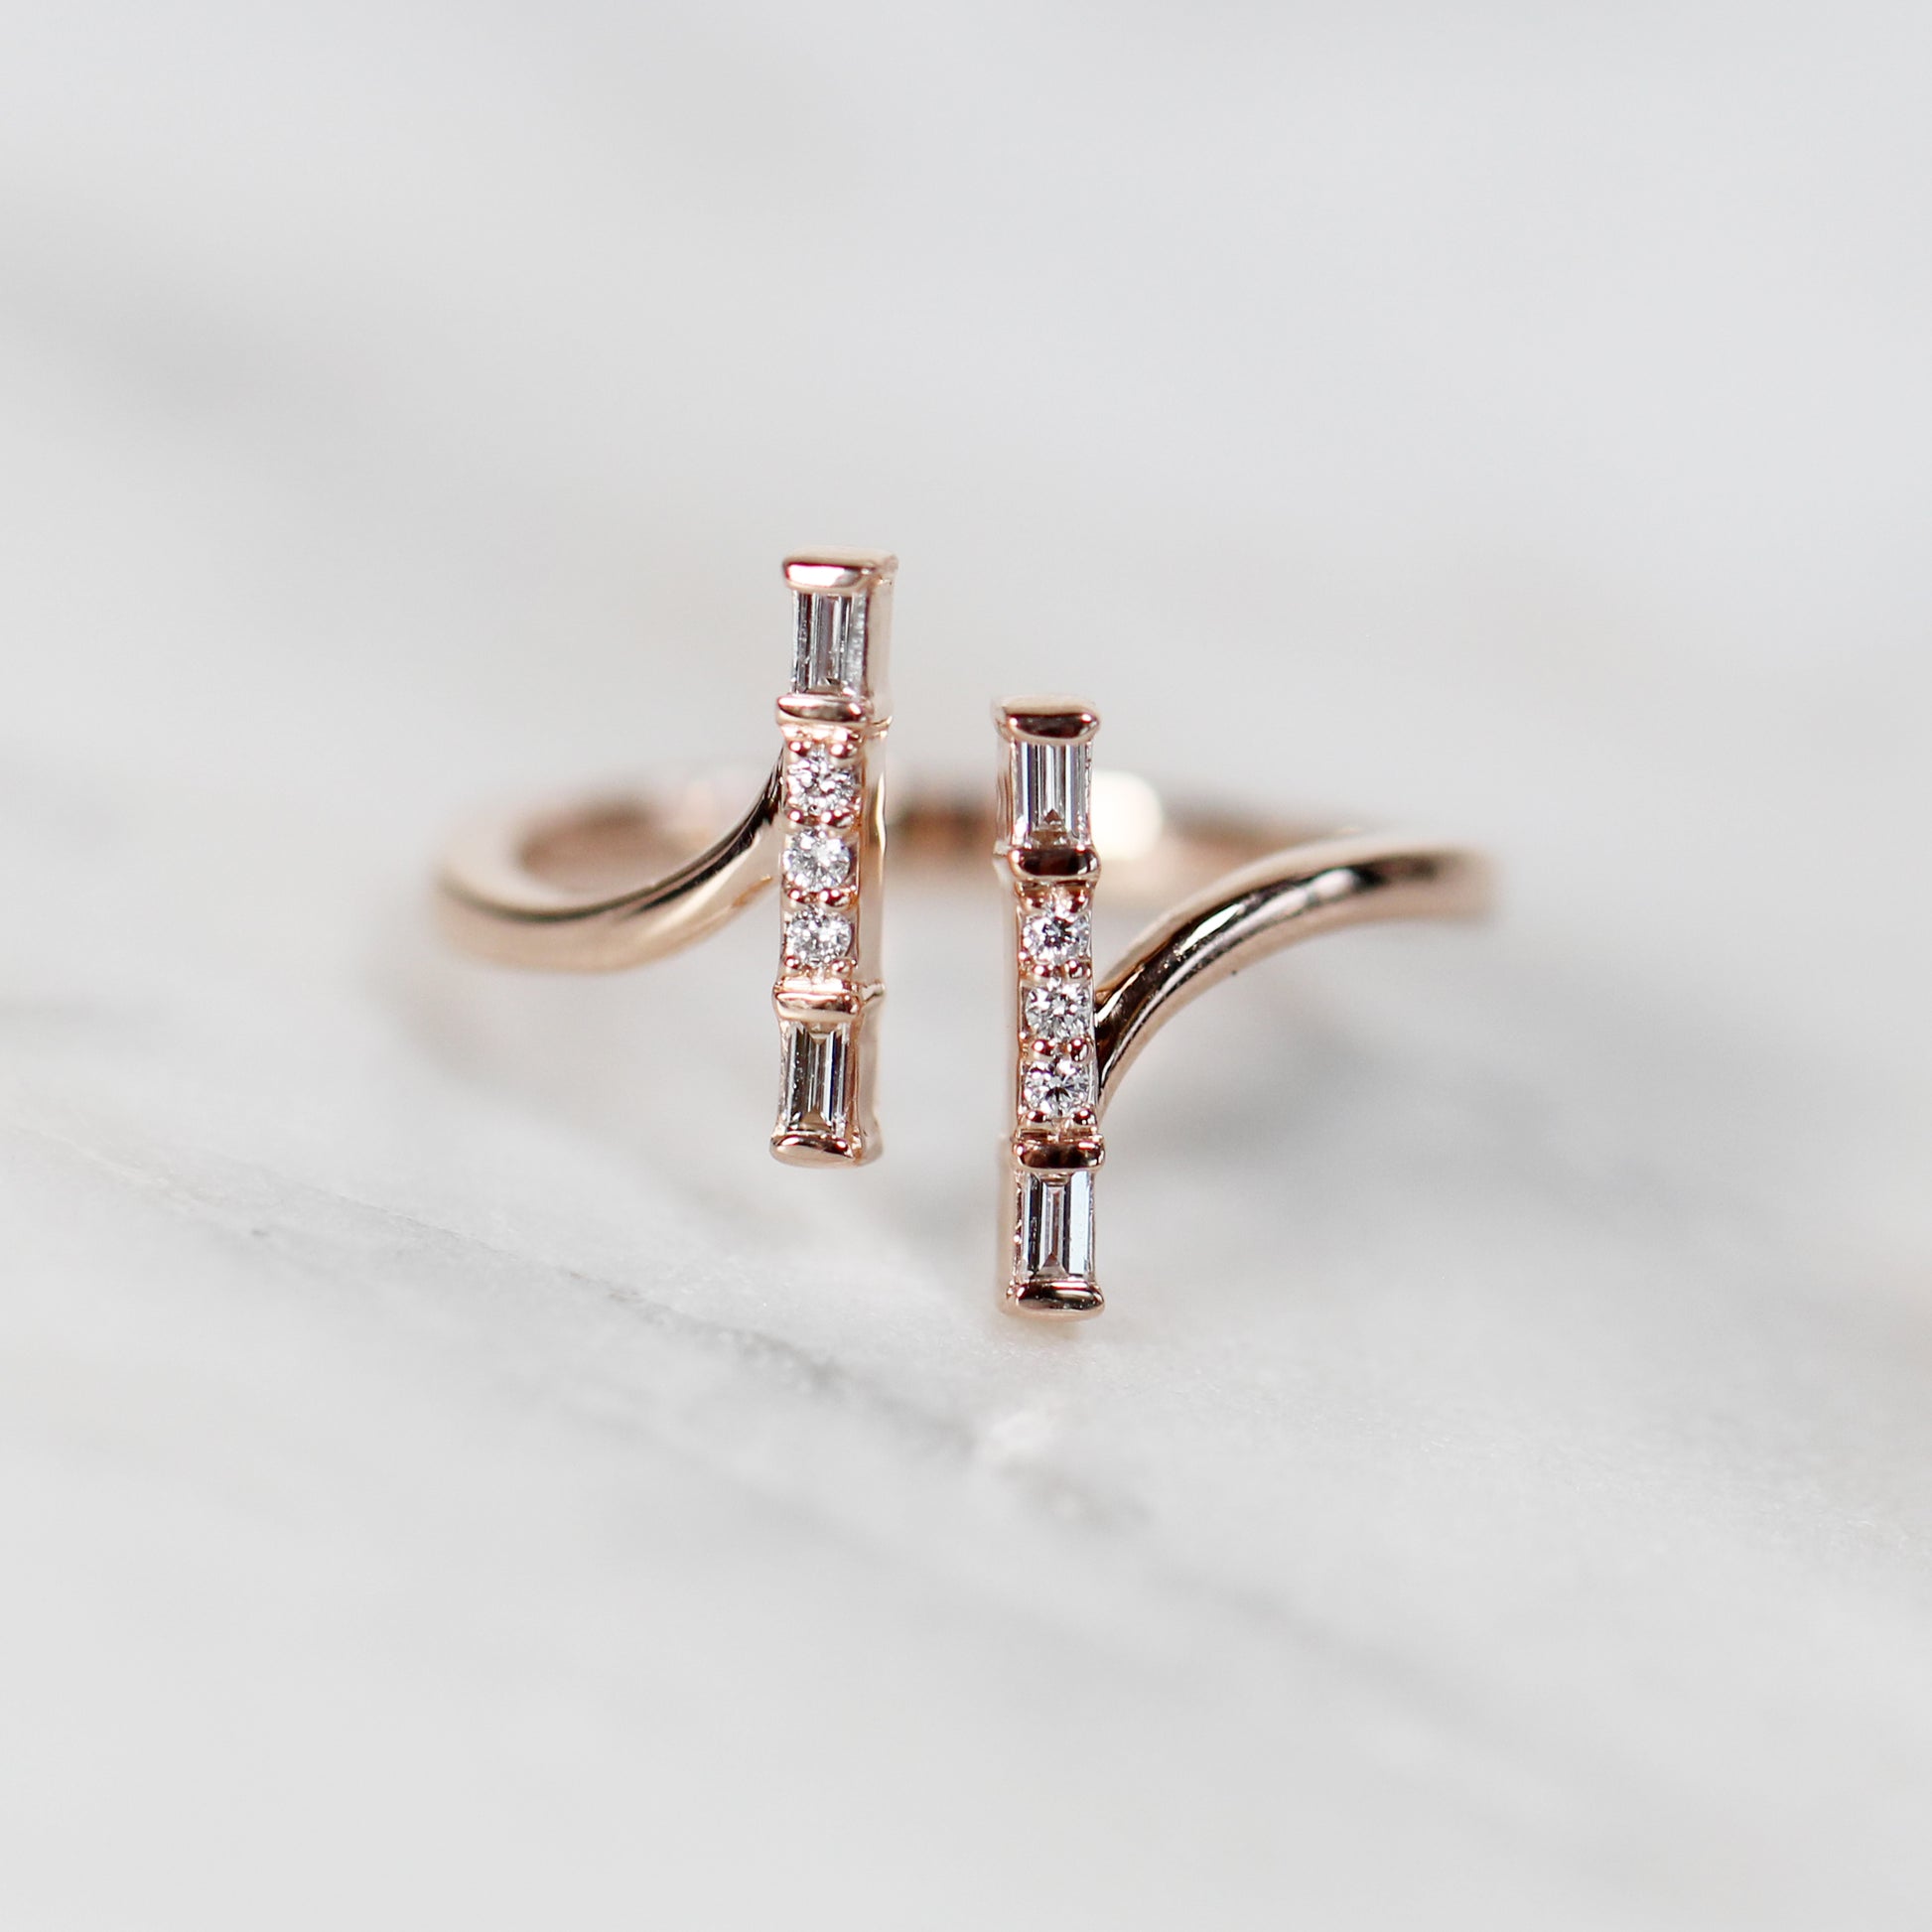 Denver Double Bar Ring - Your Choice of 14k Gold - Midwinter Co. Alternative Bridal Rings and Modern Fine Jewelry